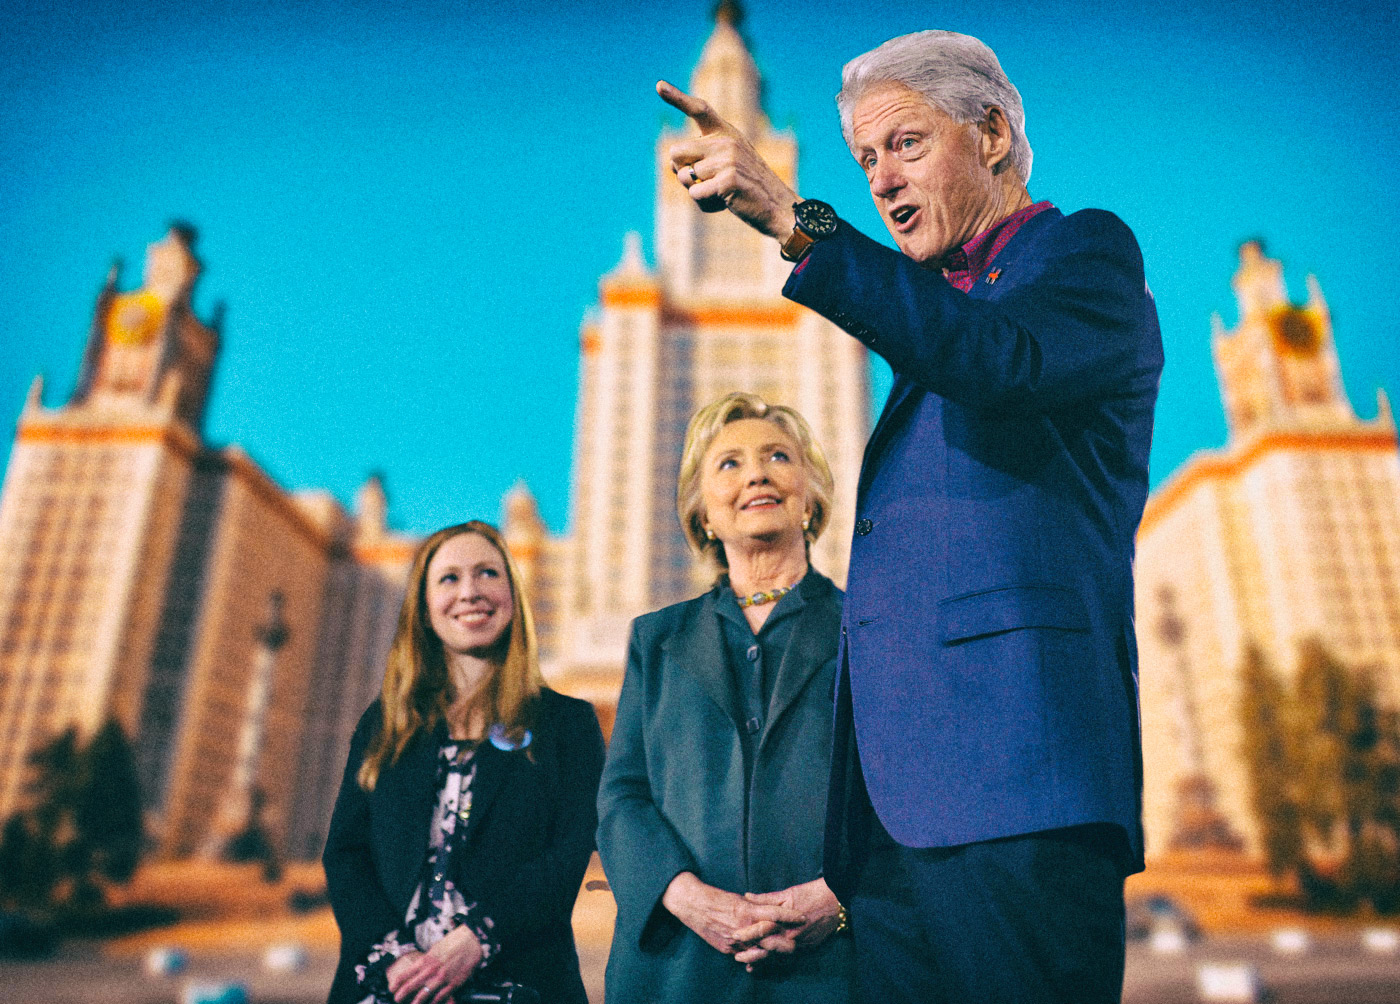 The Clintons plan to send their grandchildren to study in Russia